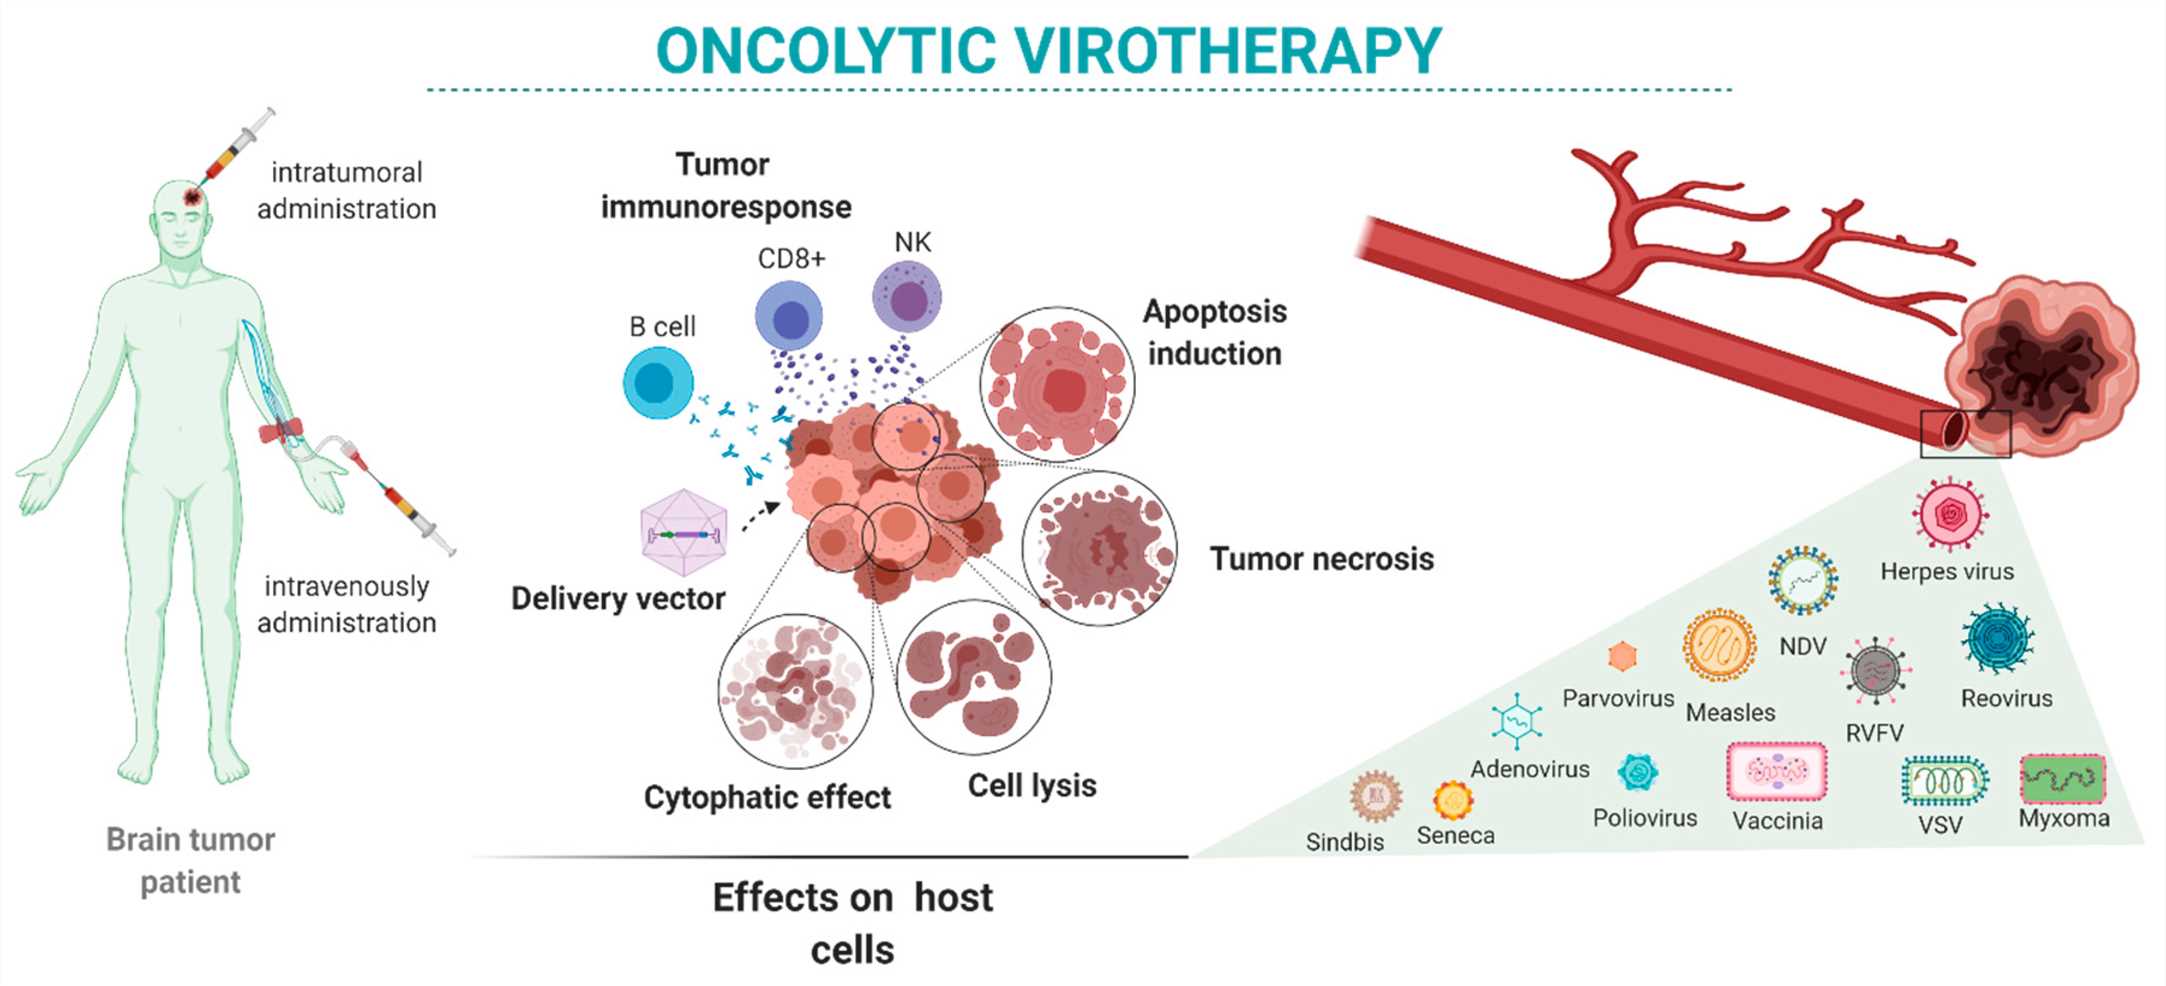 OV therapy for the treatment of brain tumors: administration routes (left), antitumor mechanisms (middle), types and characteristics of viruses (right).